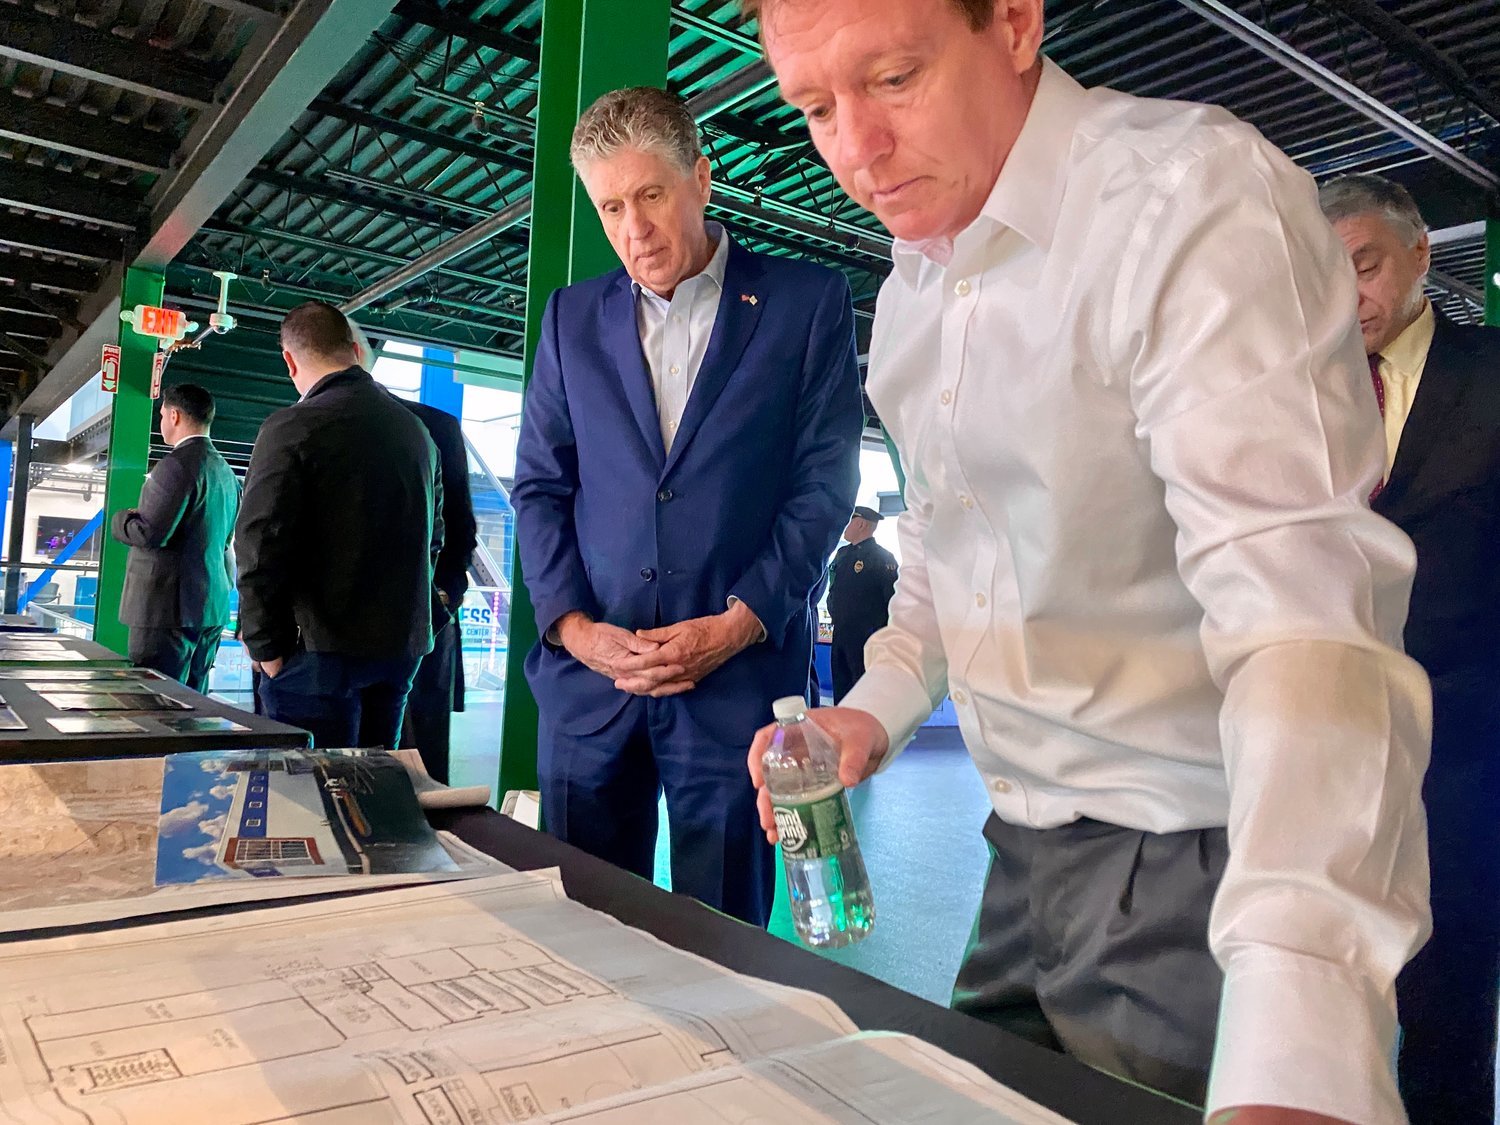 Longplex owner Jim Long (right) and Rhode Island Gov. Dan McKee go over original blueprints from the complex's construction, at a tour of the Tiverton facility last month.